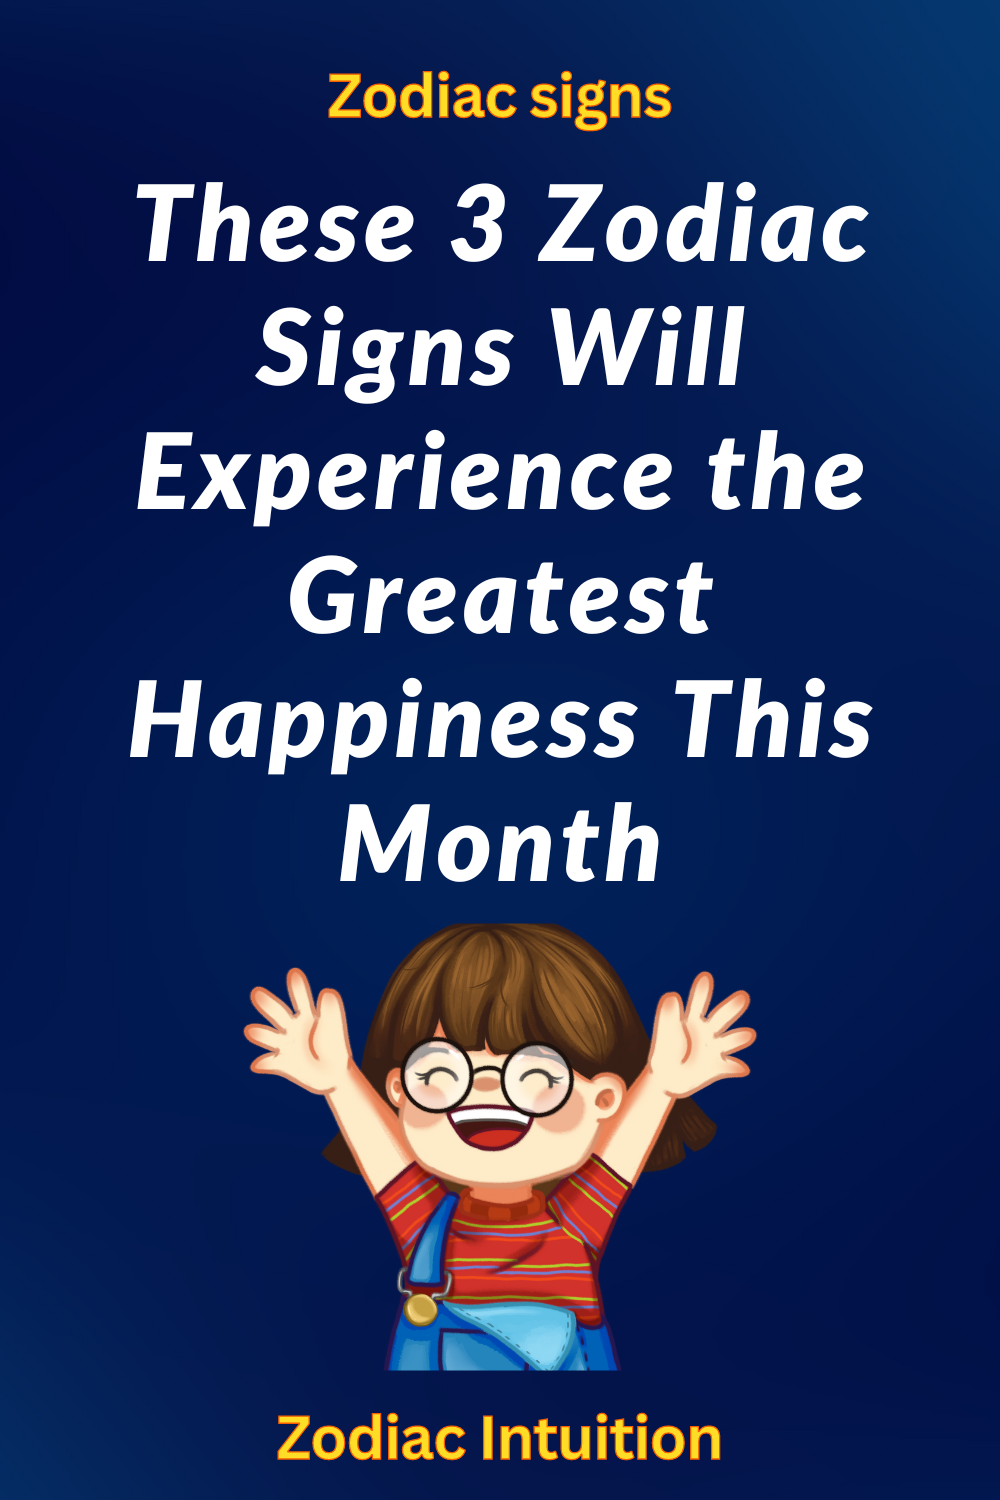 These 3 Zodiac Signs Will Experience the Greatest Happiness This Month